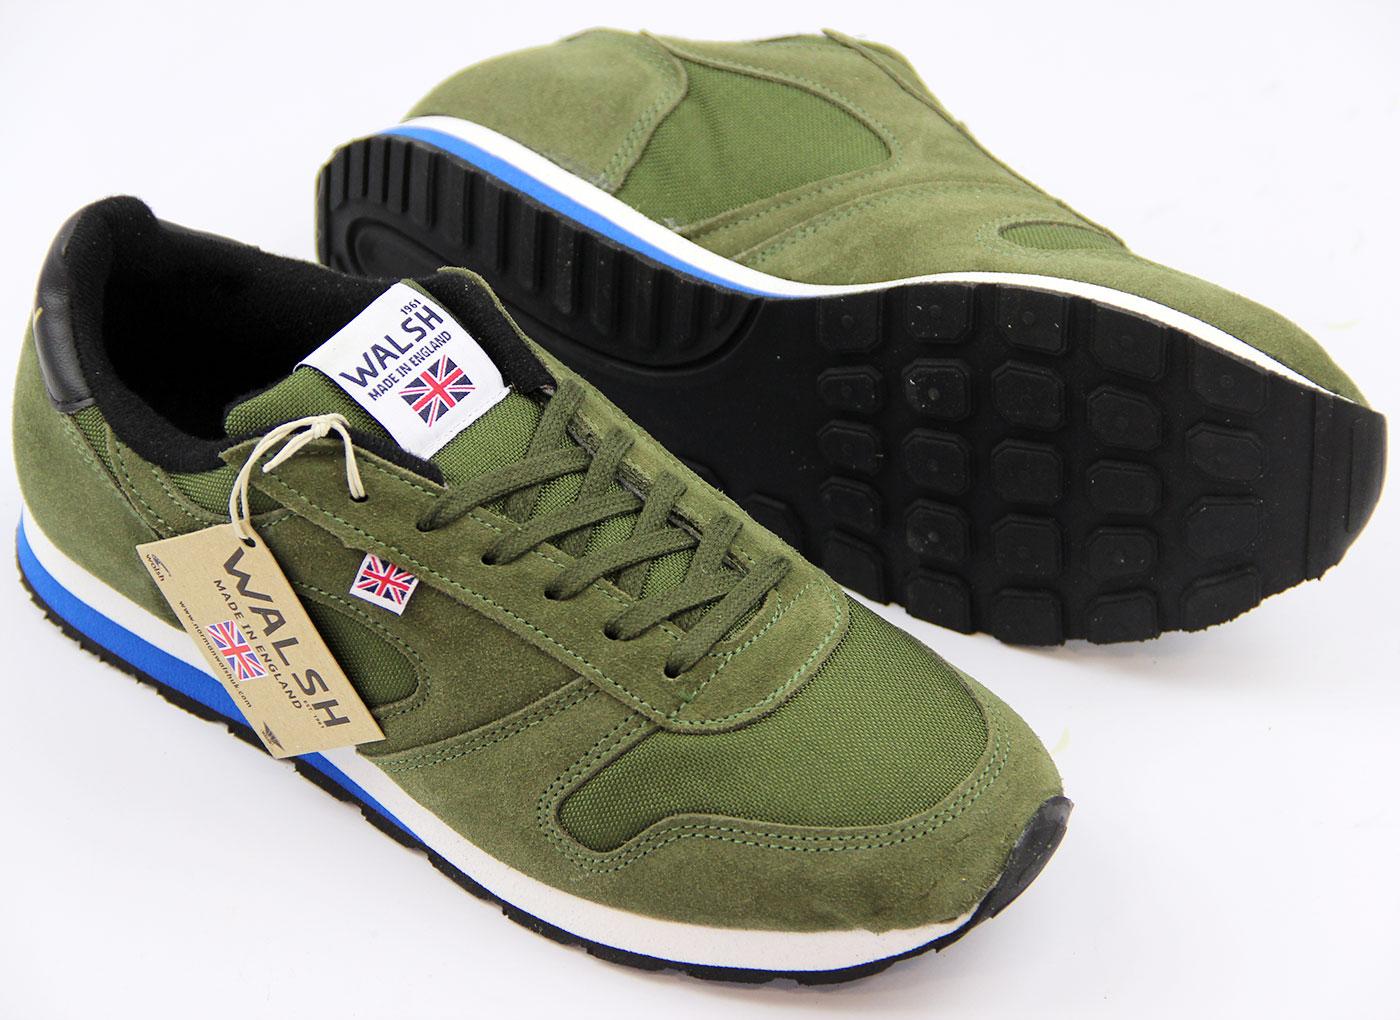 NORMAN WALSH Seoul '88 Retro Indie Running Trainers Olive 1988